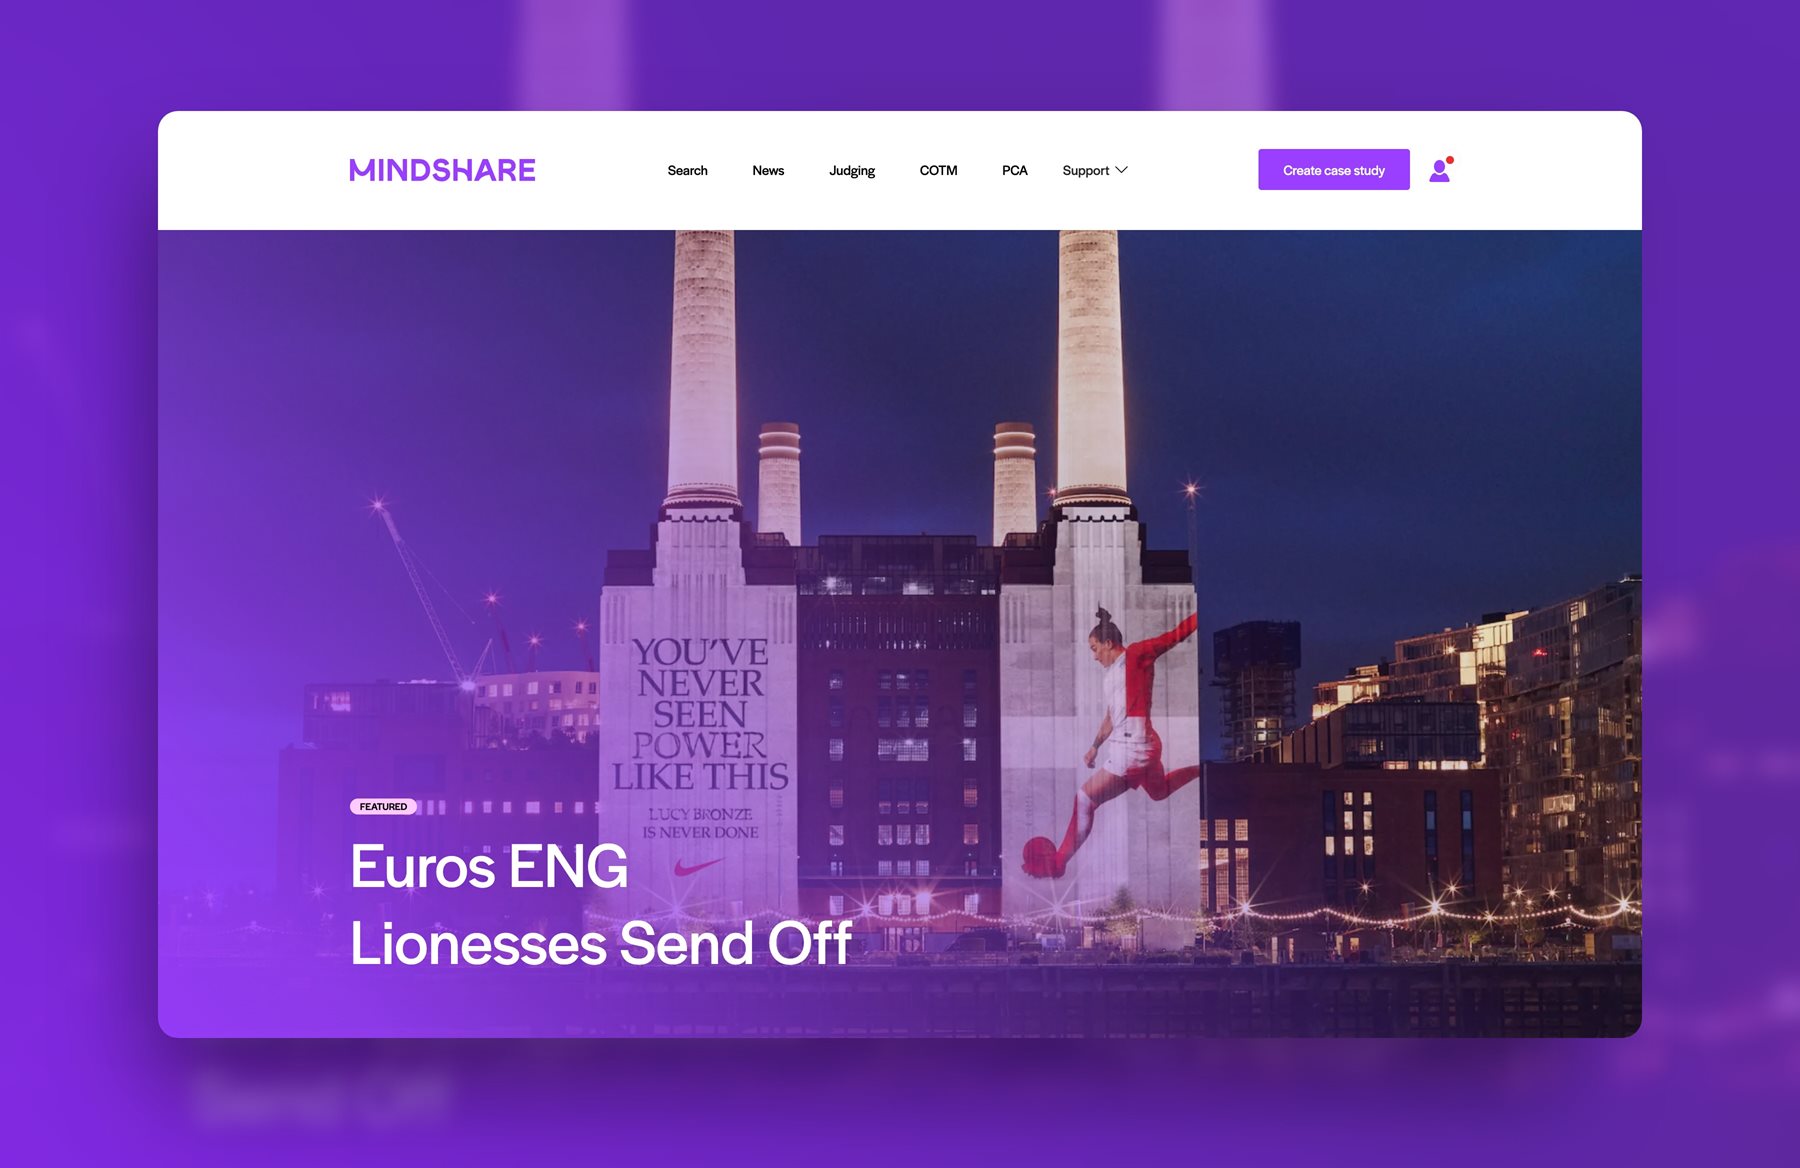 Mindshare case studies home page, against a purple background, showing a case study of Emngland women's football team